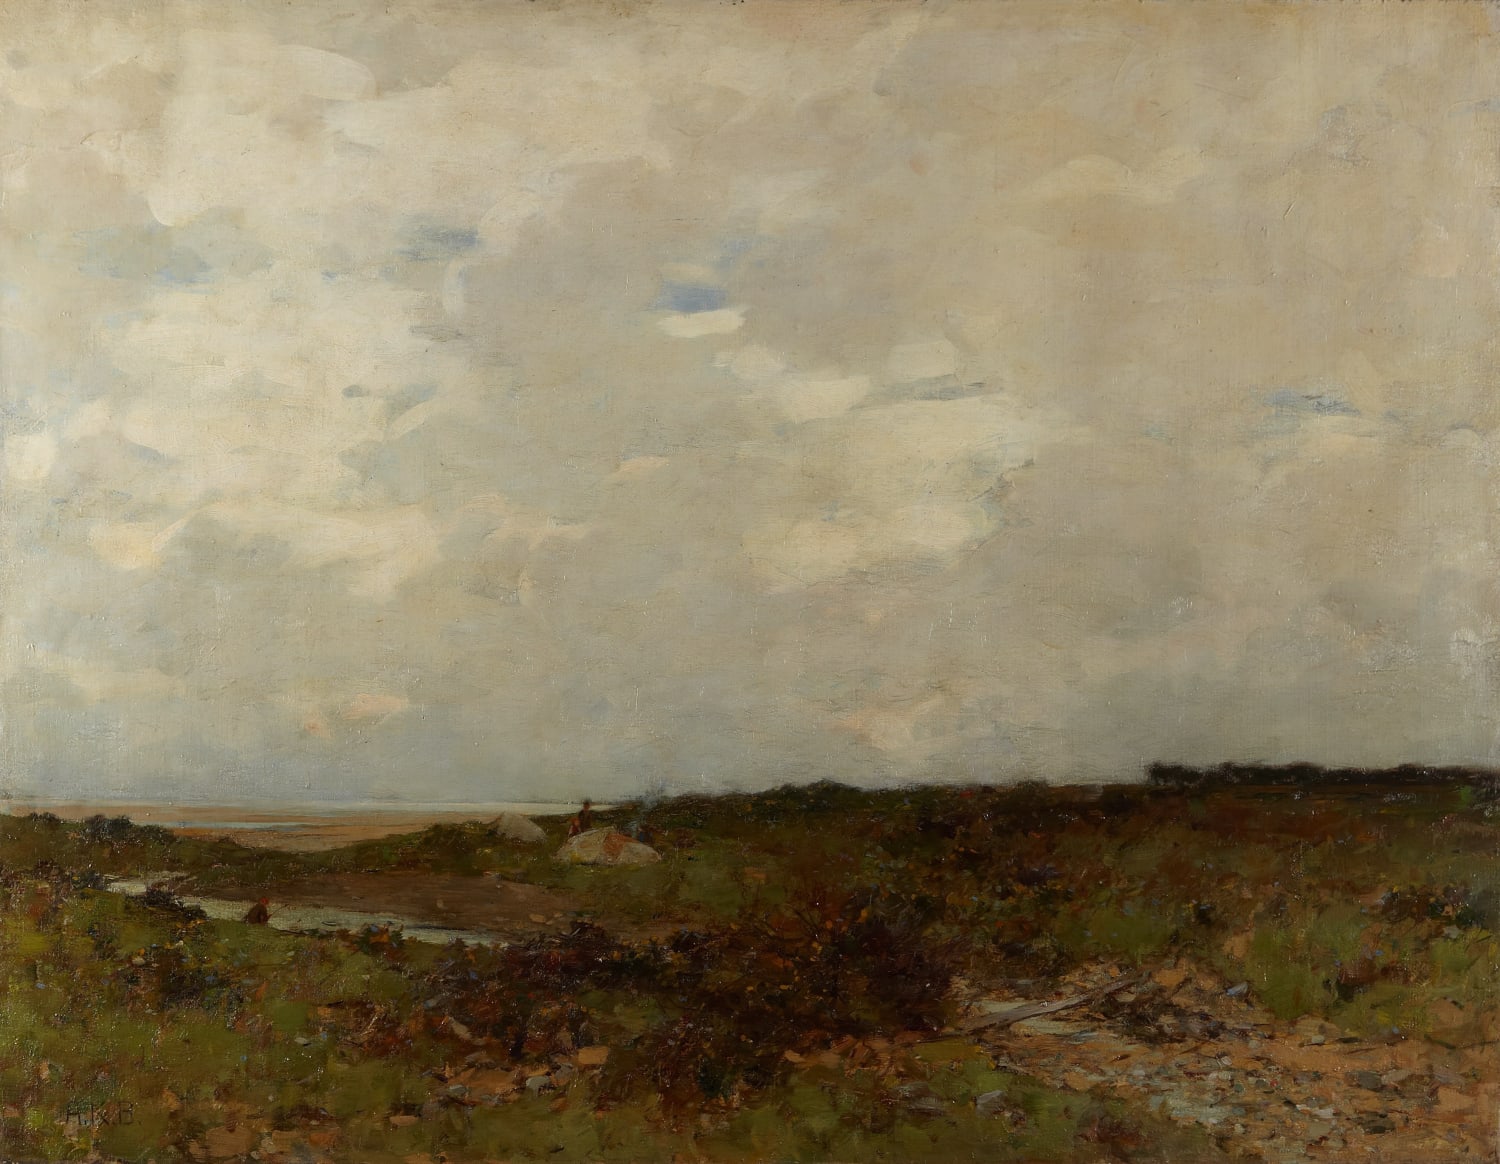 Alexander Kellock Brown RSA (1849-1922), A Grey Day  Oil on canvas, around 1907, 86.9 x 113.2 cm  RSA Diploma Collection (Deposited, 1908) 1994.153